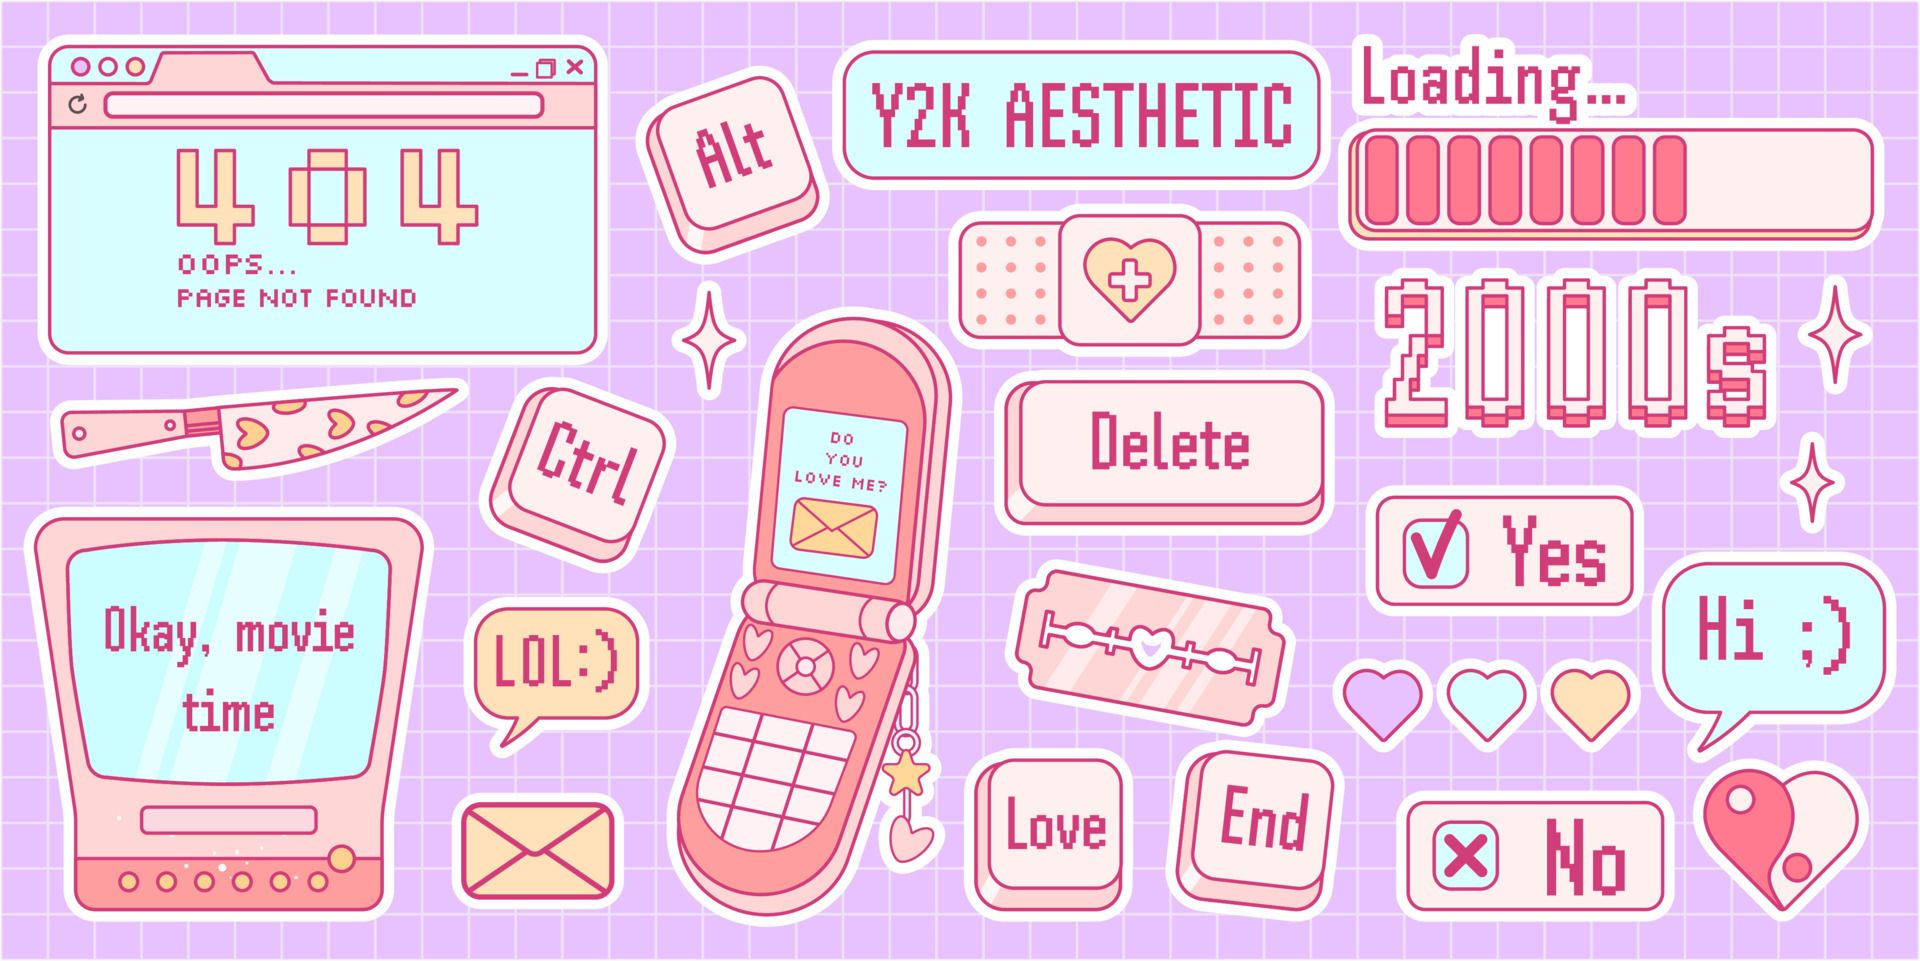 A sticker set with various items from the 90s and 00s, including a mobile phone, a TV, and chat bubbles. - 2000s